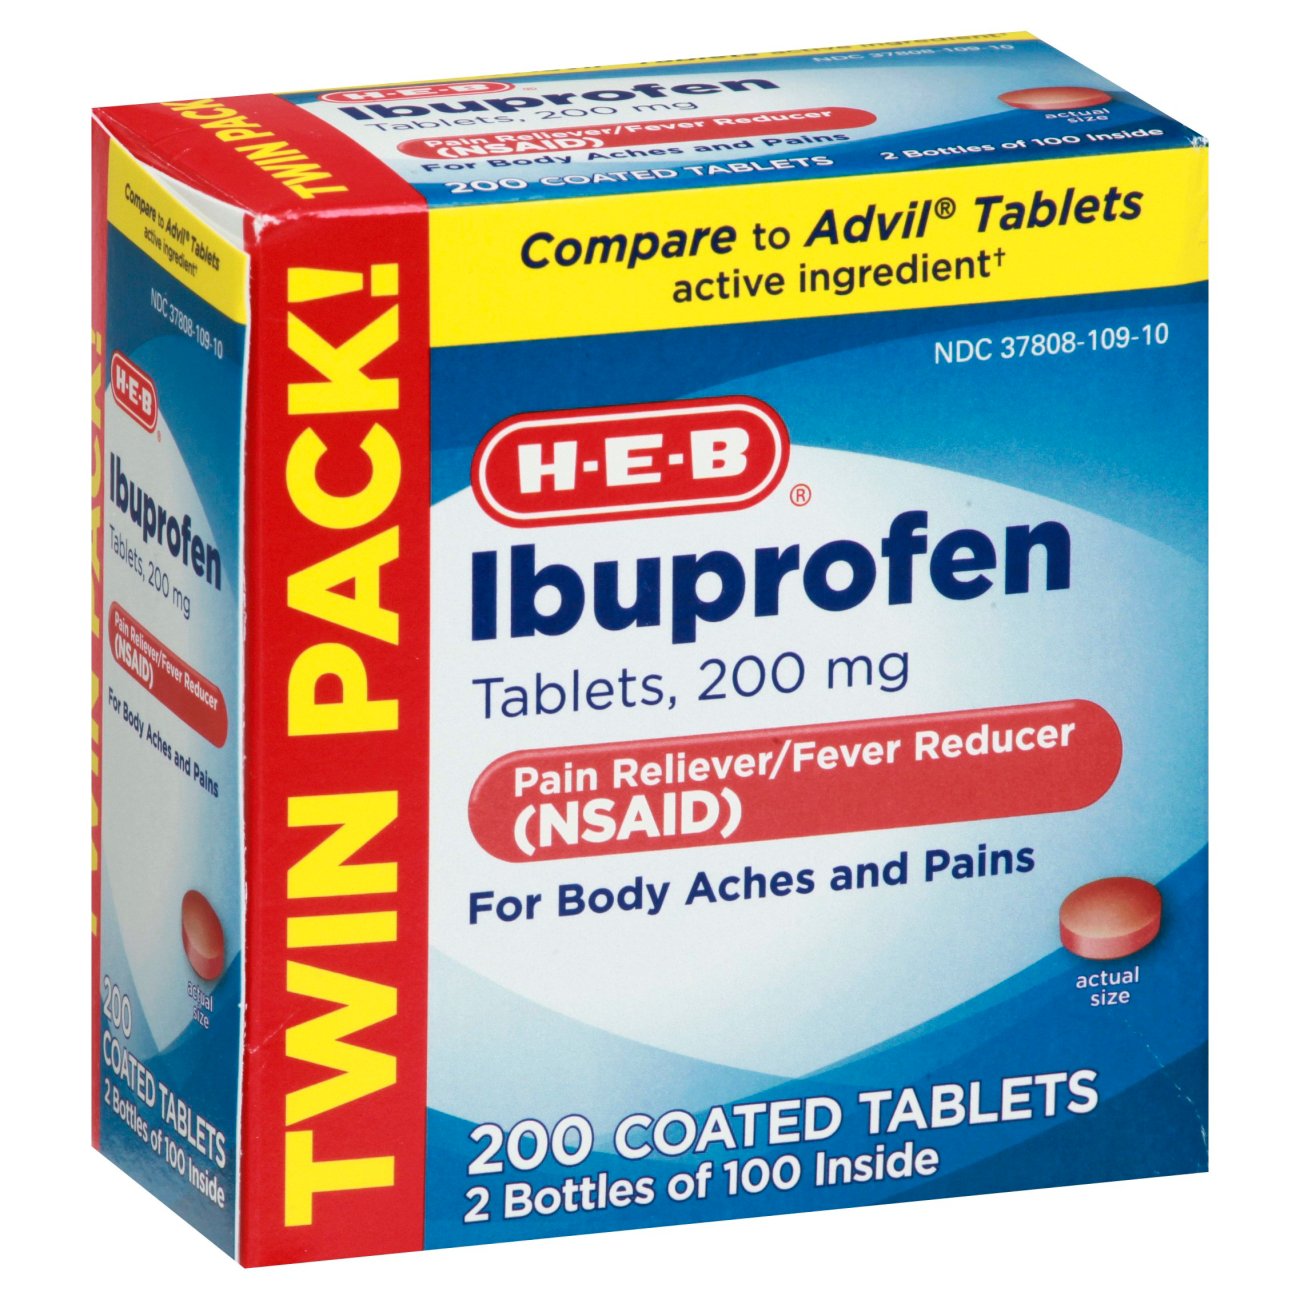 H E B Ibuprofen 200 mg Coated Tablets Value Pack Shop Pain Relievers